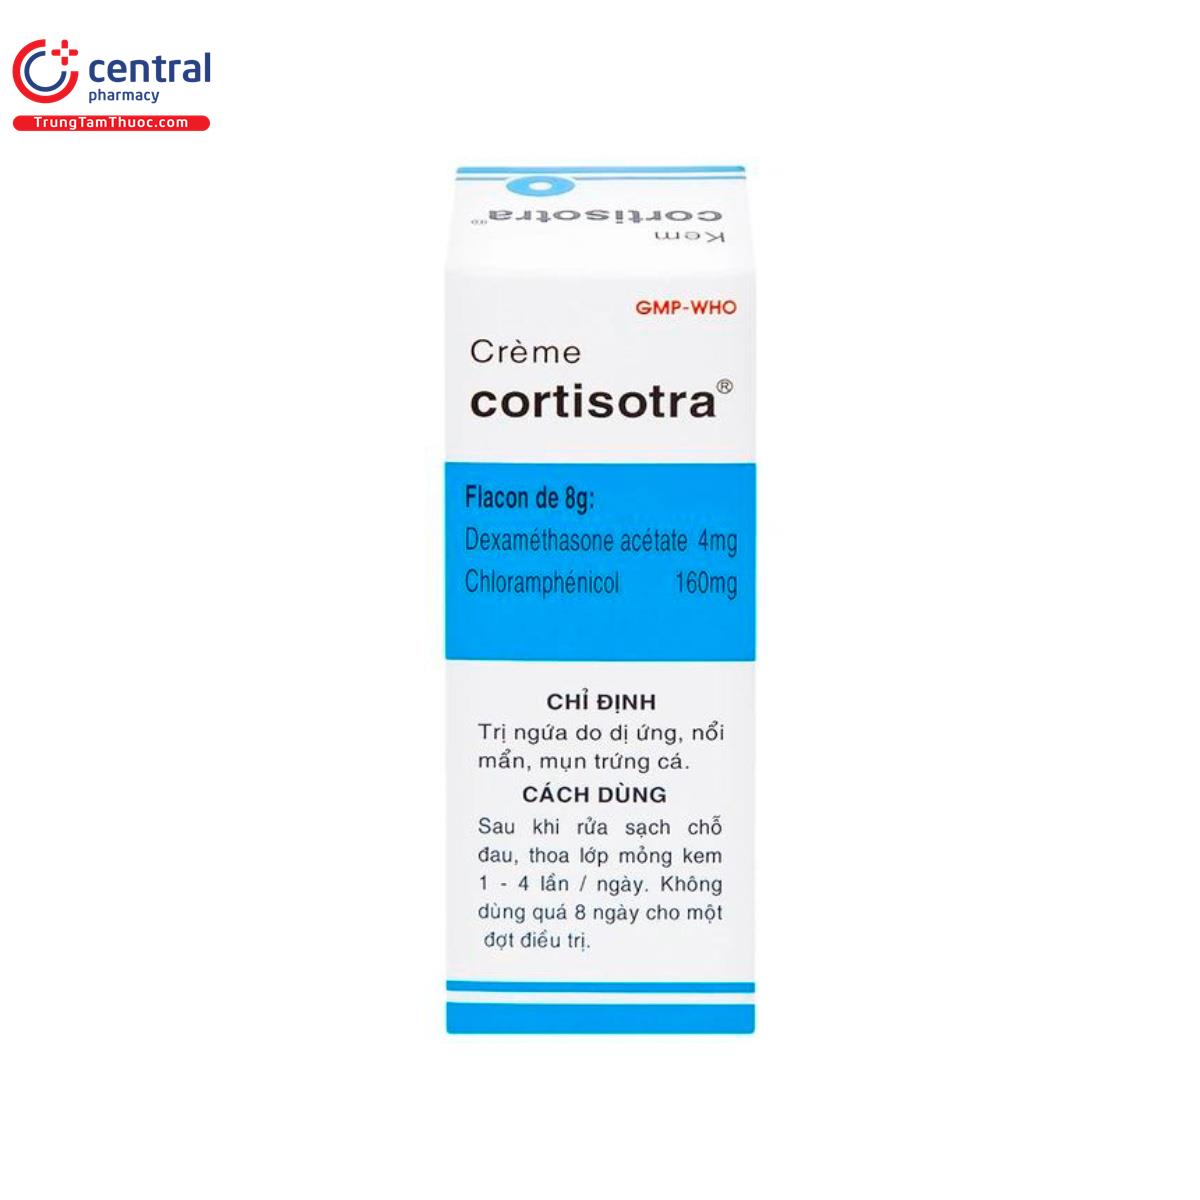 Cortisotra